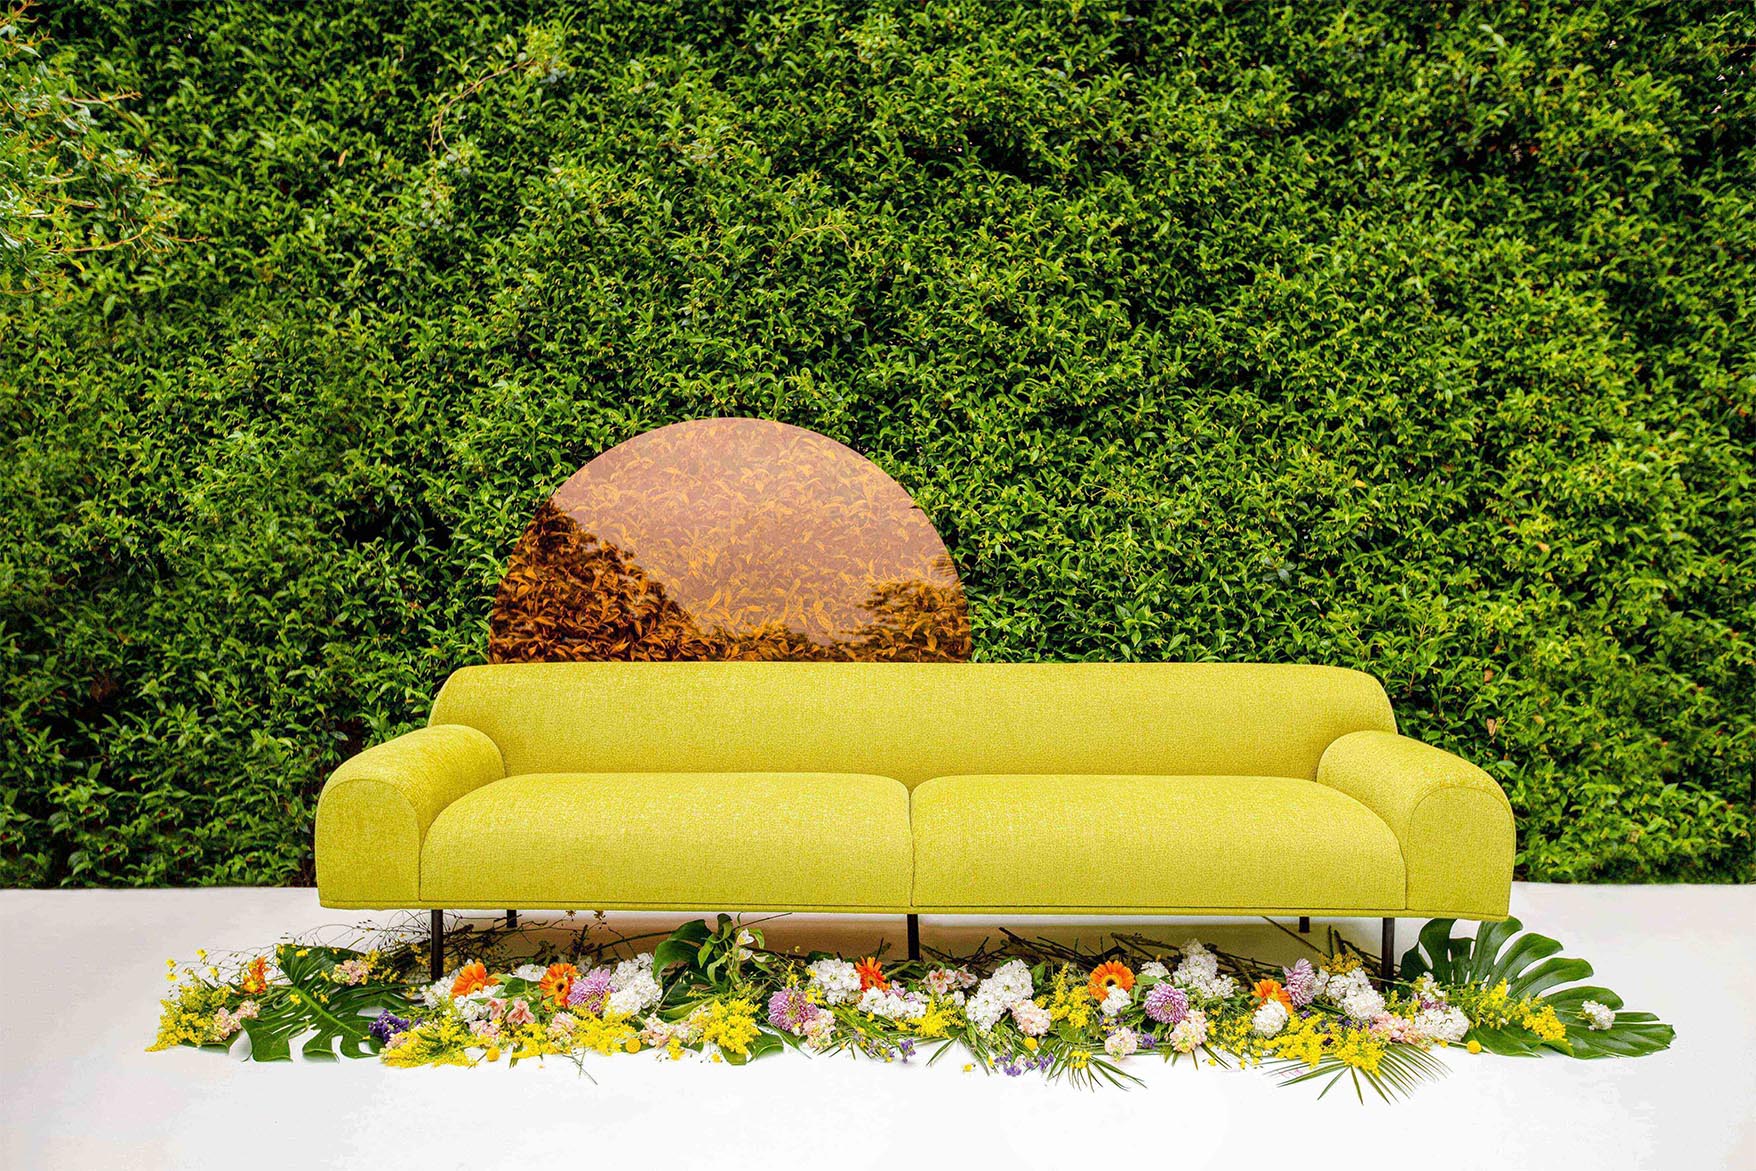 Bring The Summer Vibes To Your Living Spaces Wıth The Grob Nob Collection